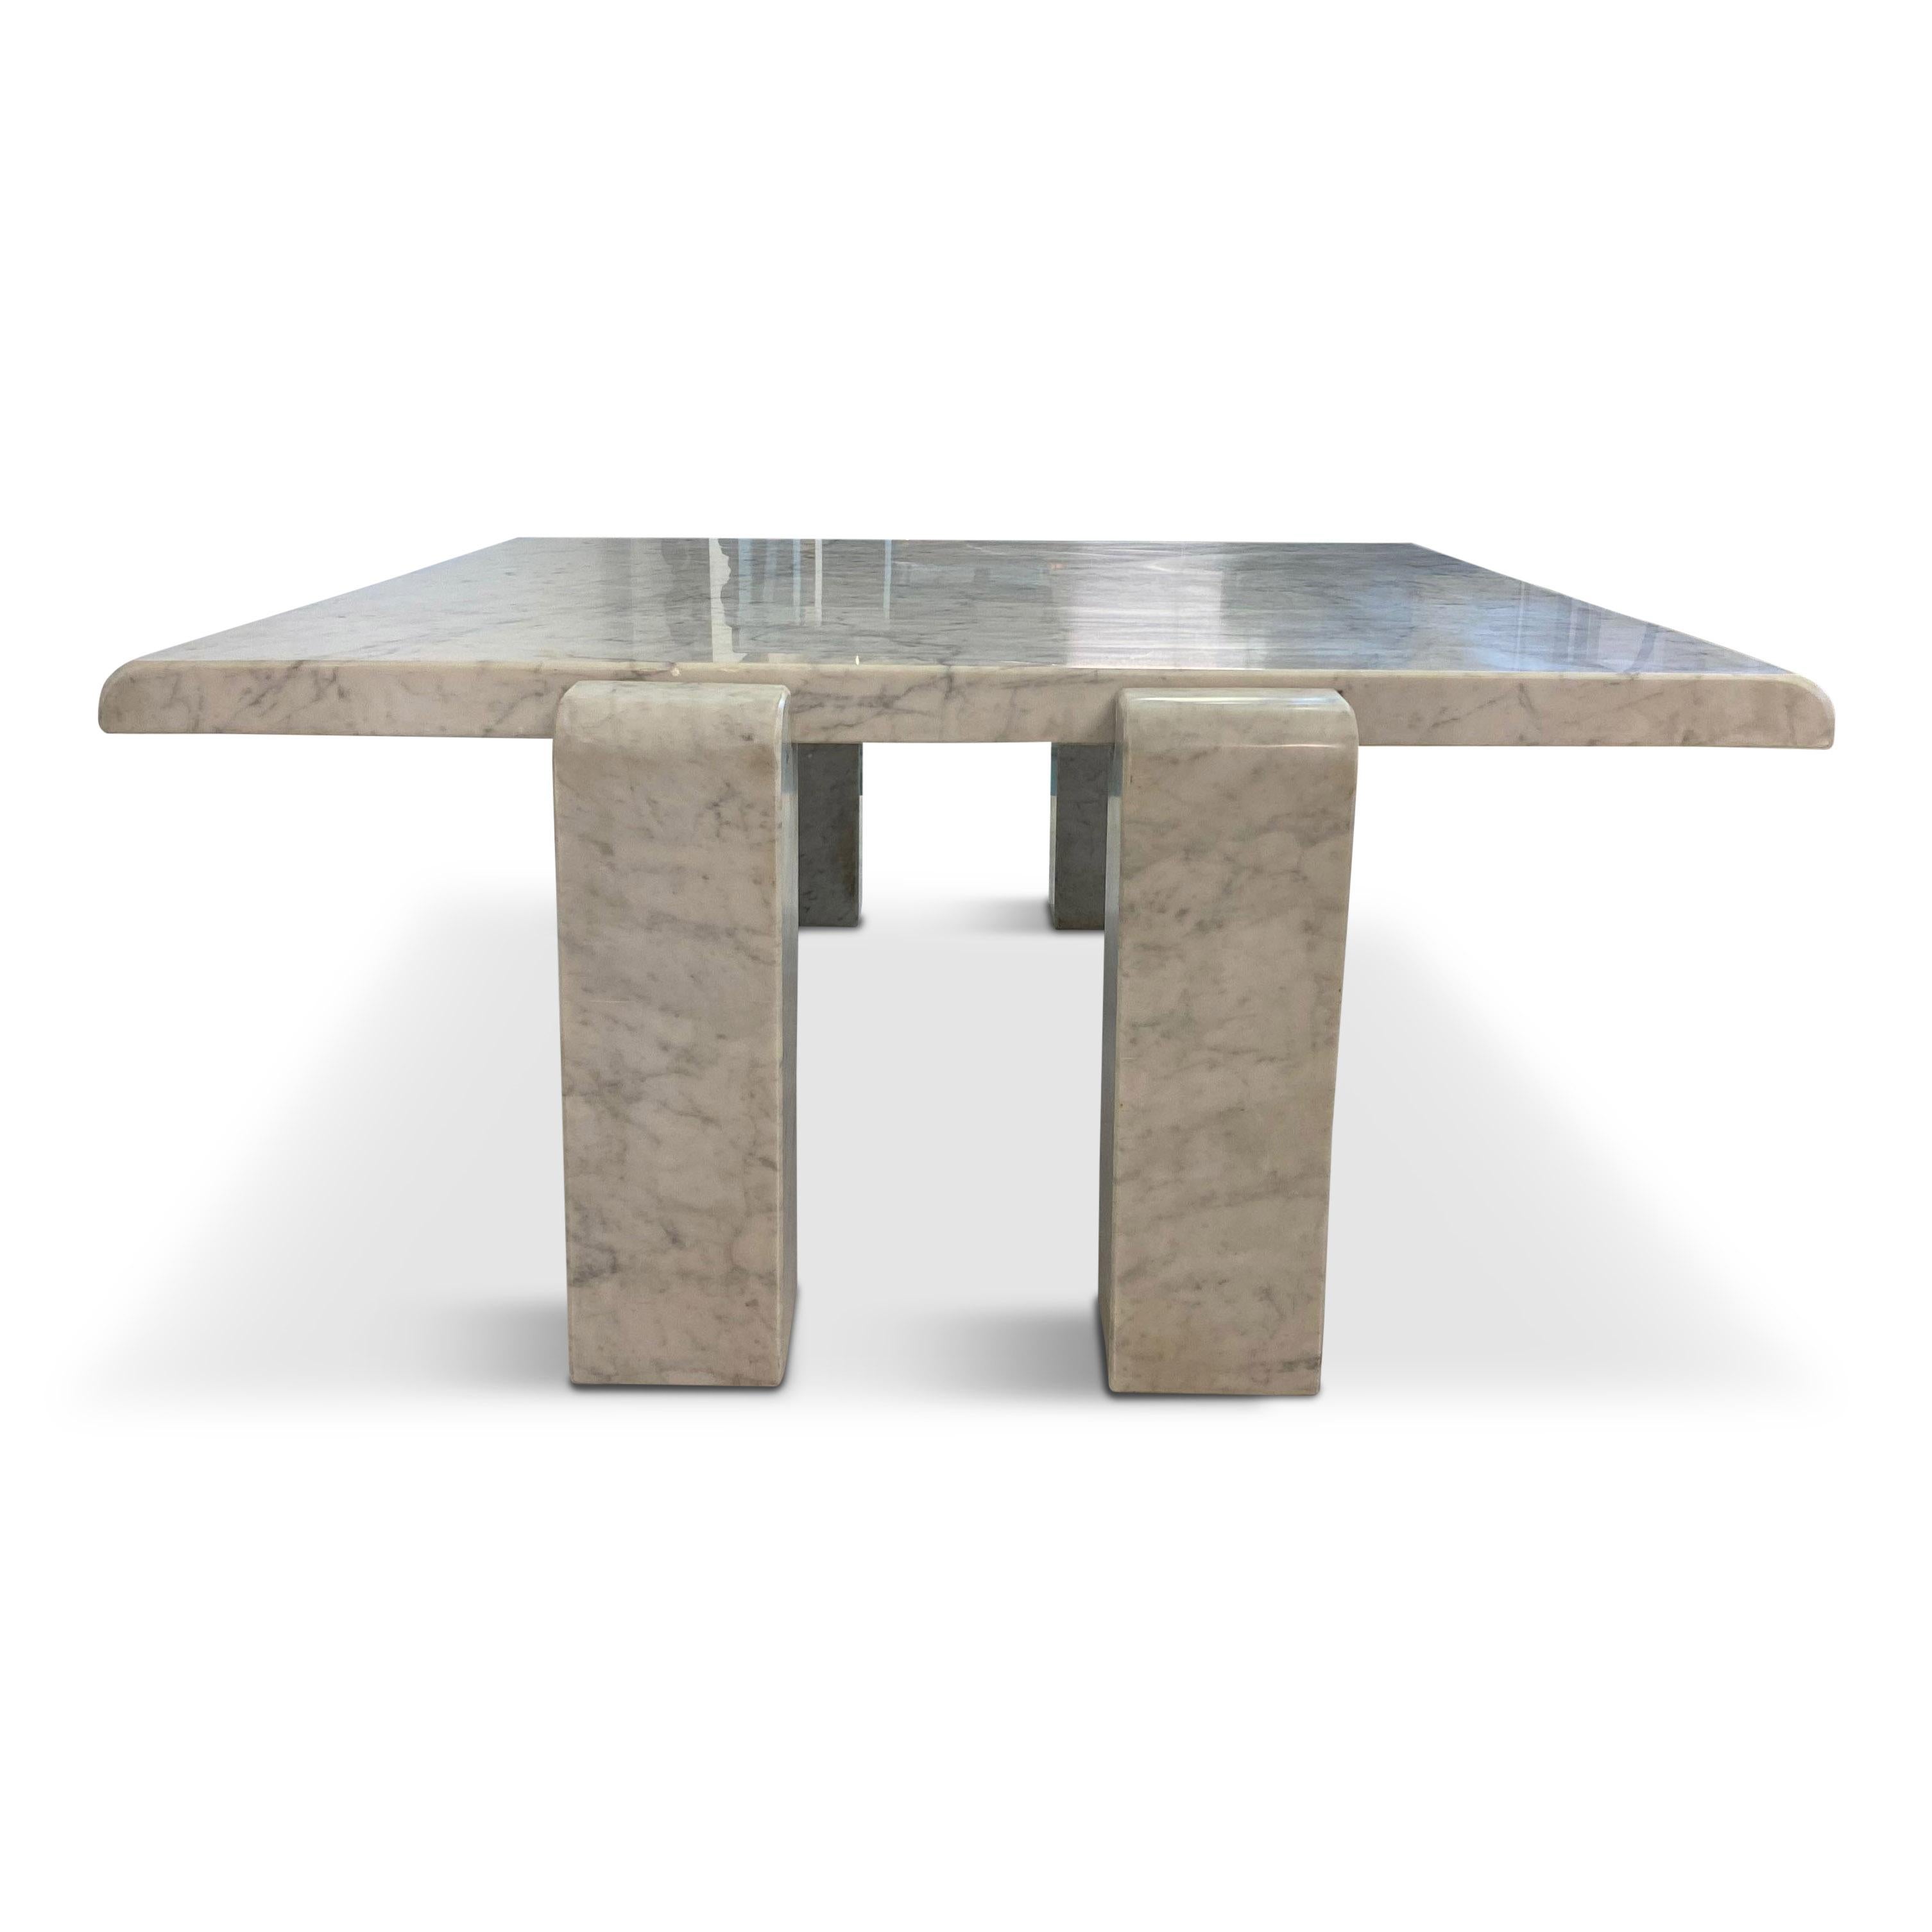 1970s White Italian Coffee Table in Carrara Marble by Skipper In Good Condition For Sale In London, London